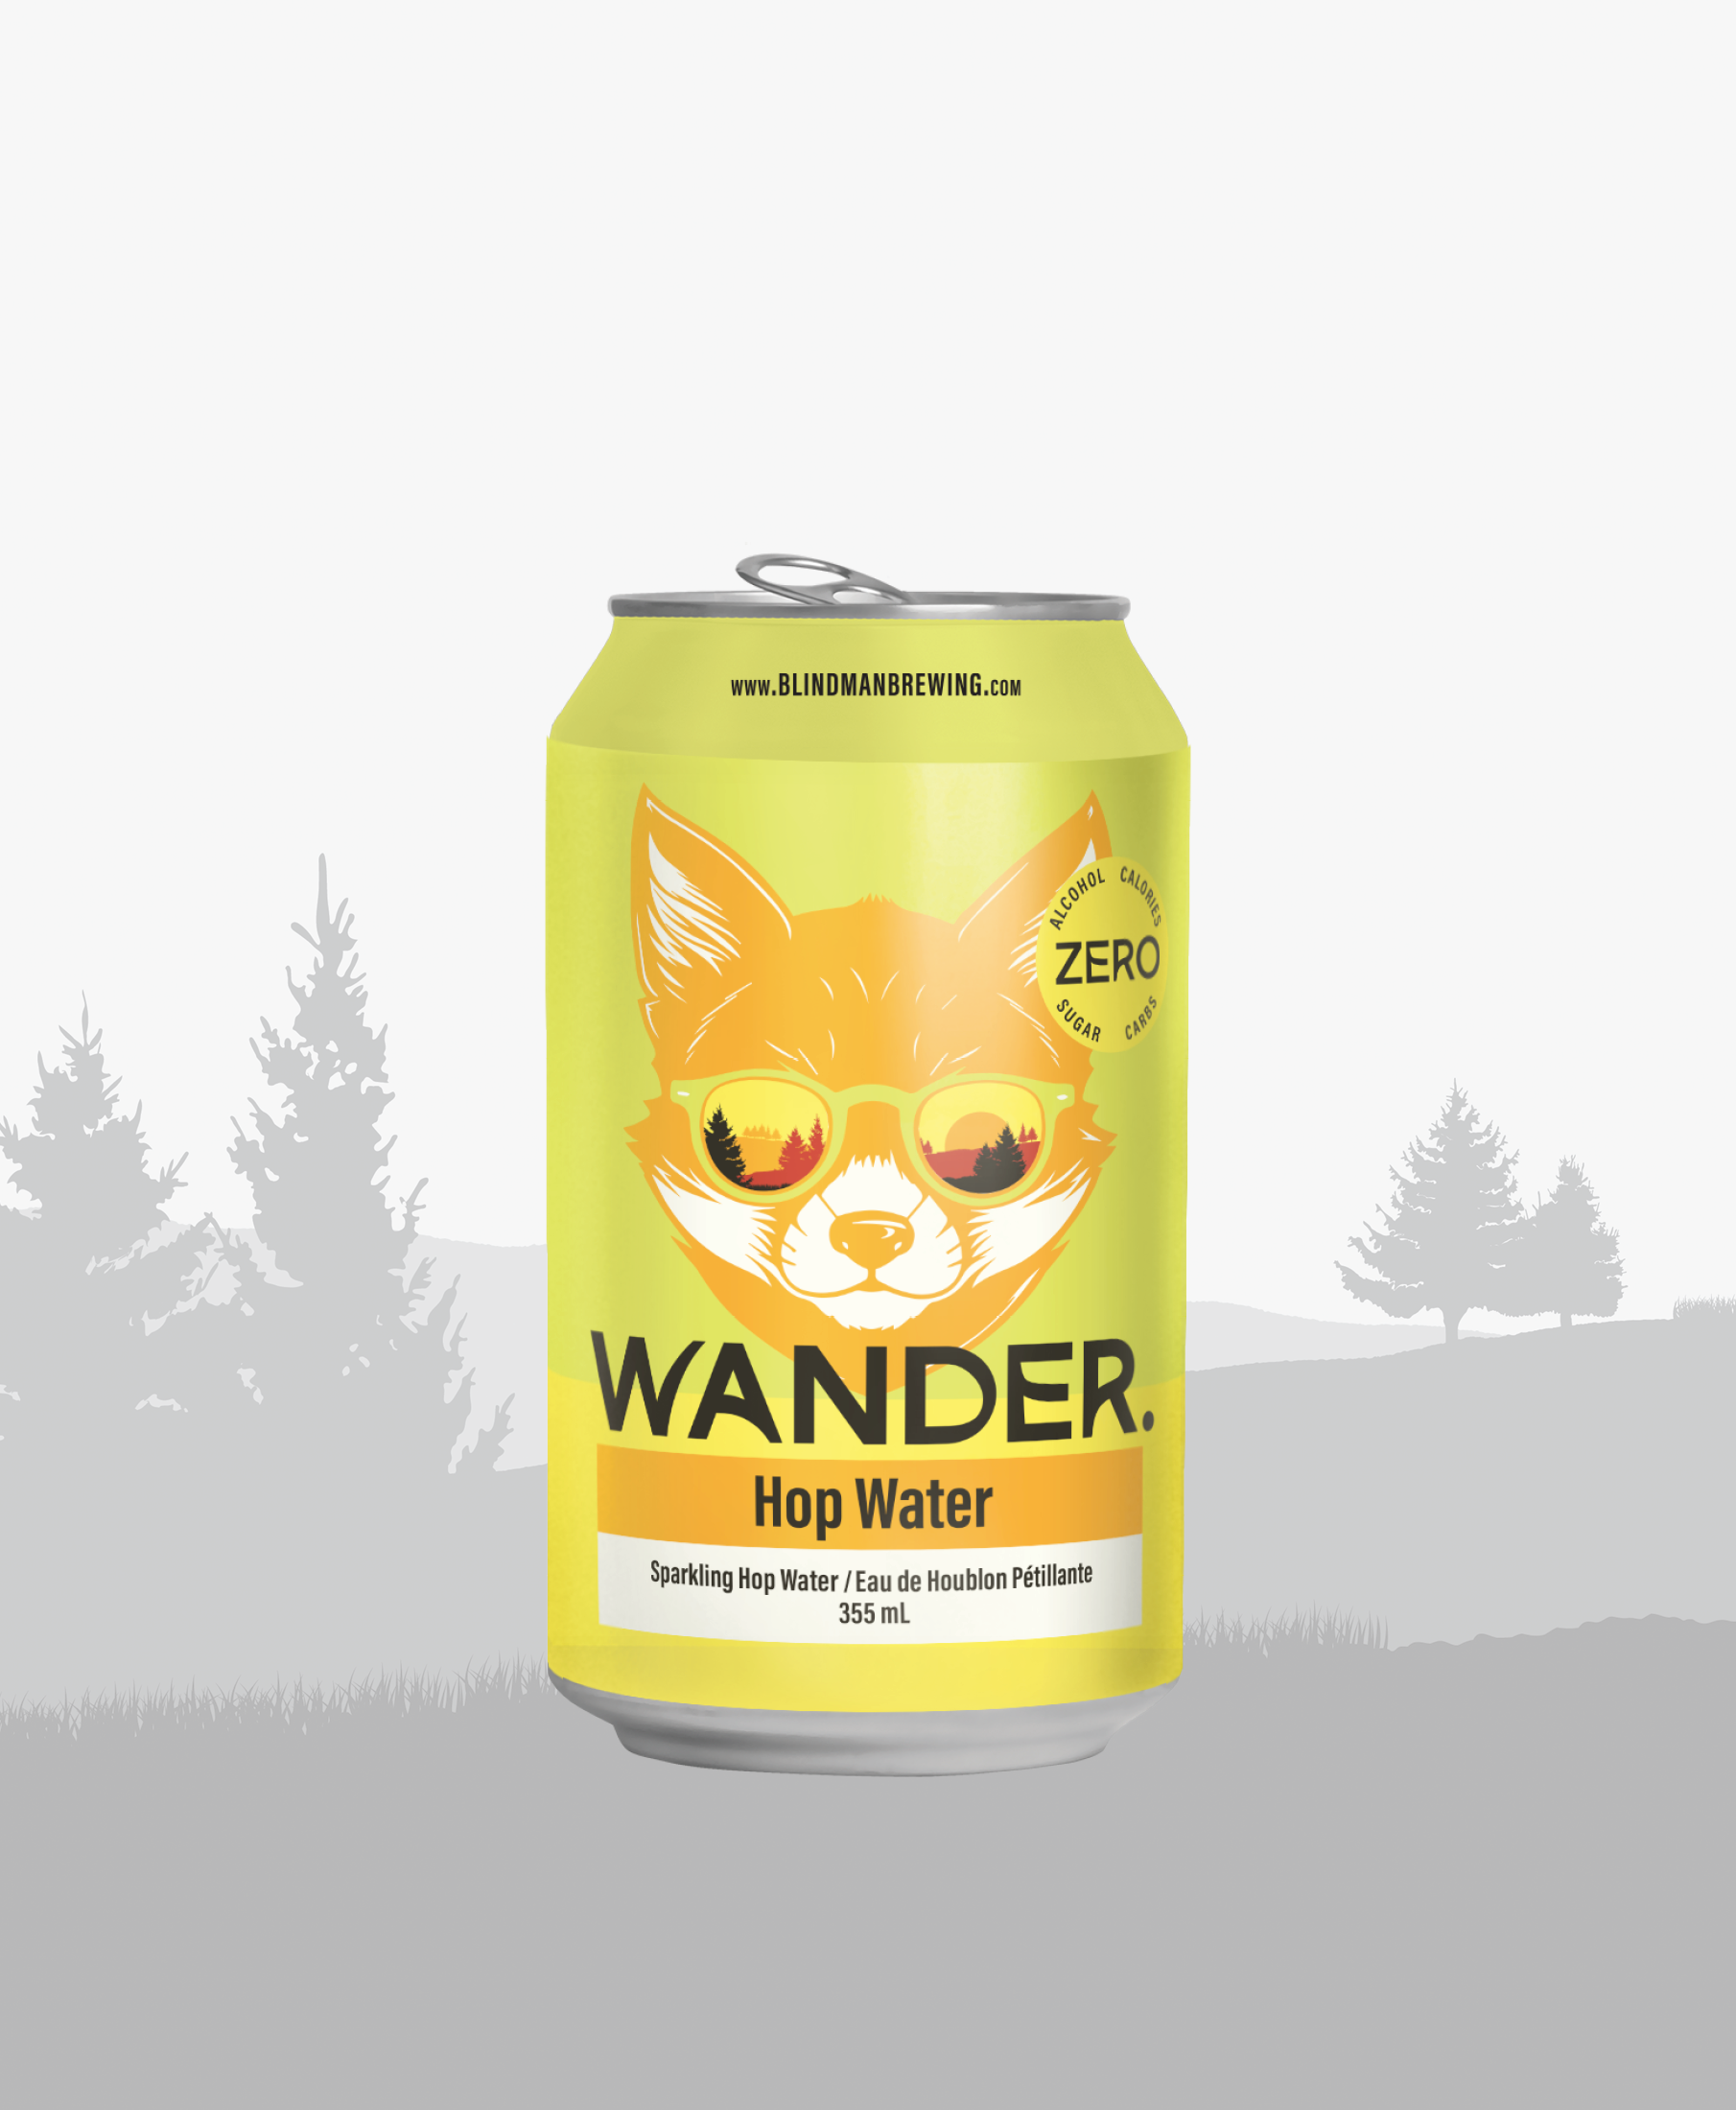 Can of Wander Hop water on a background of light grey trees